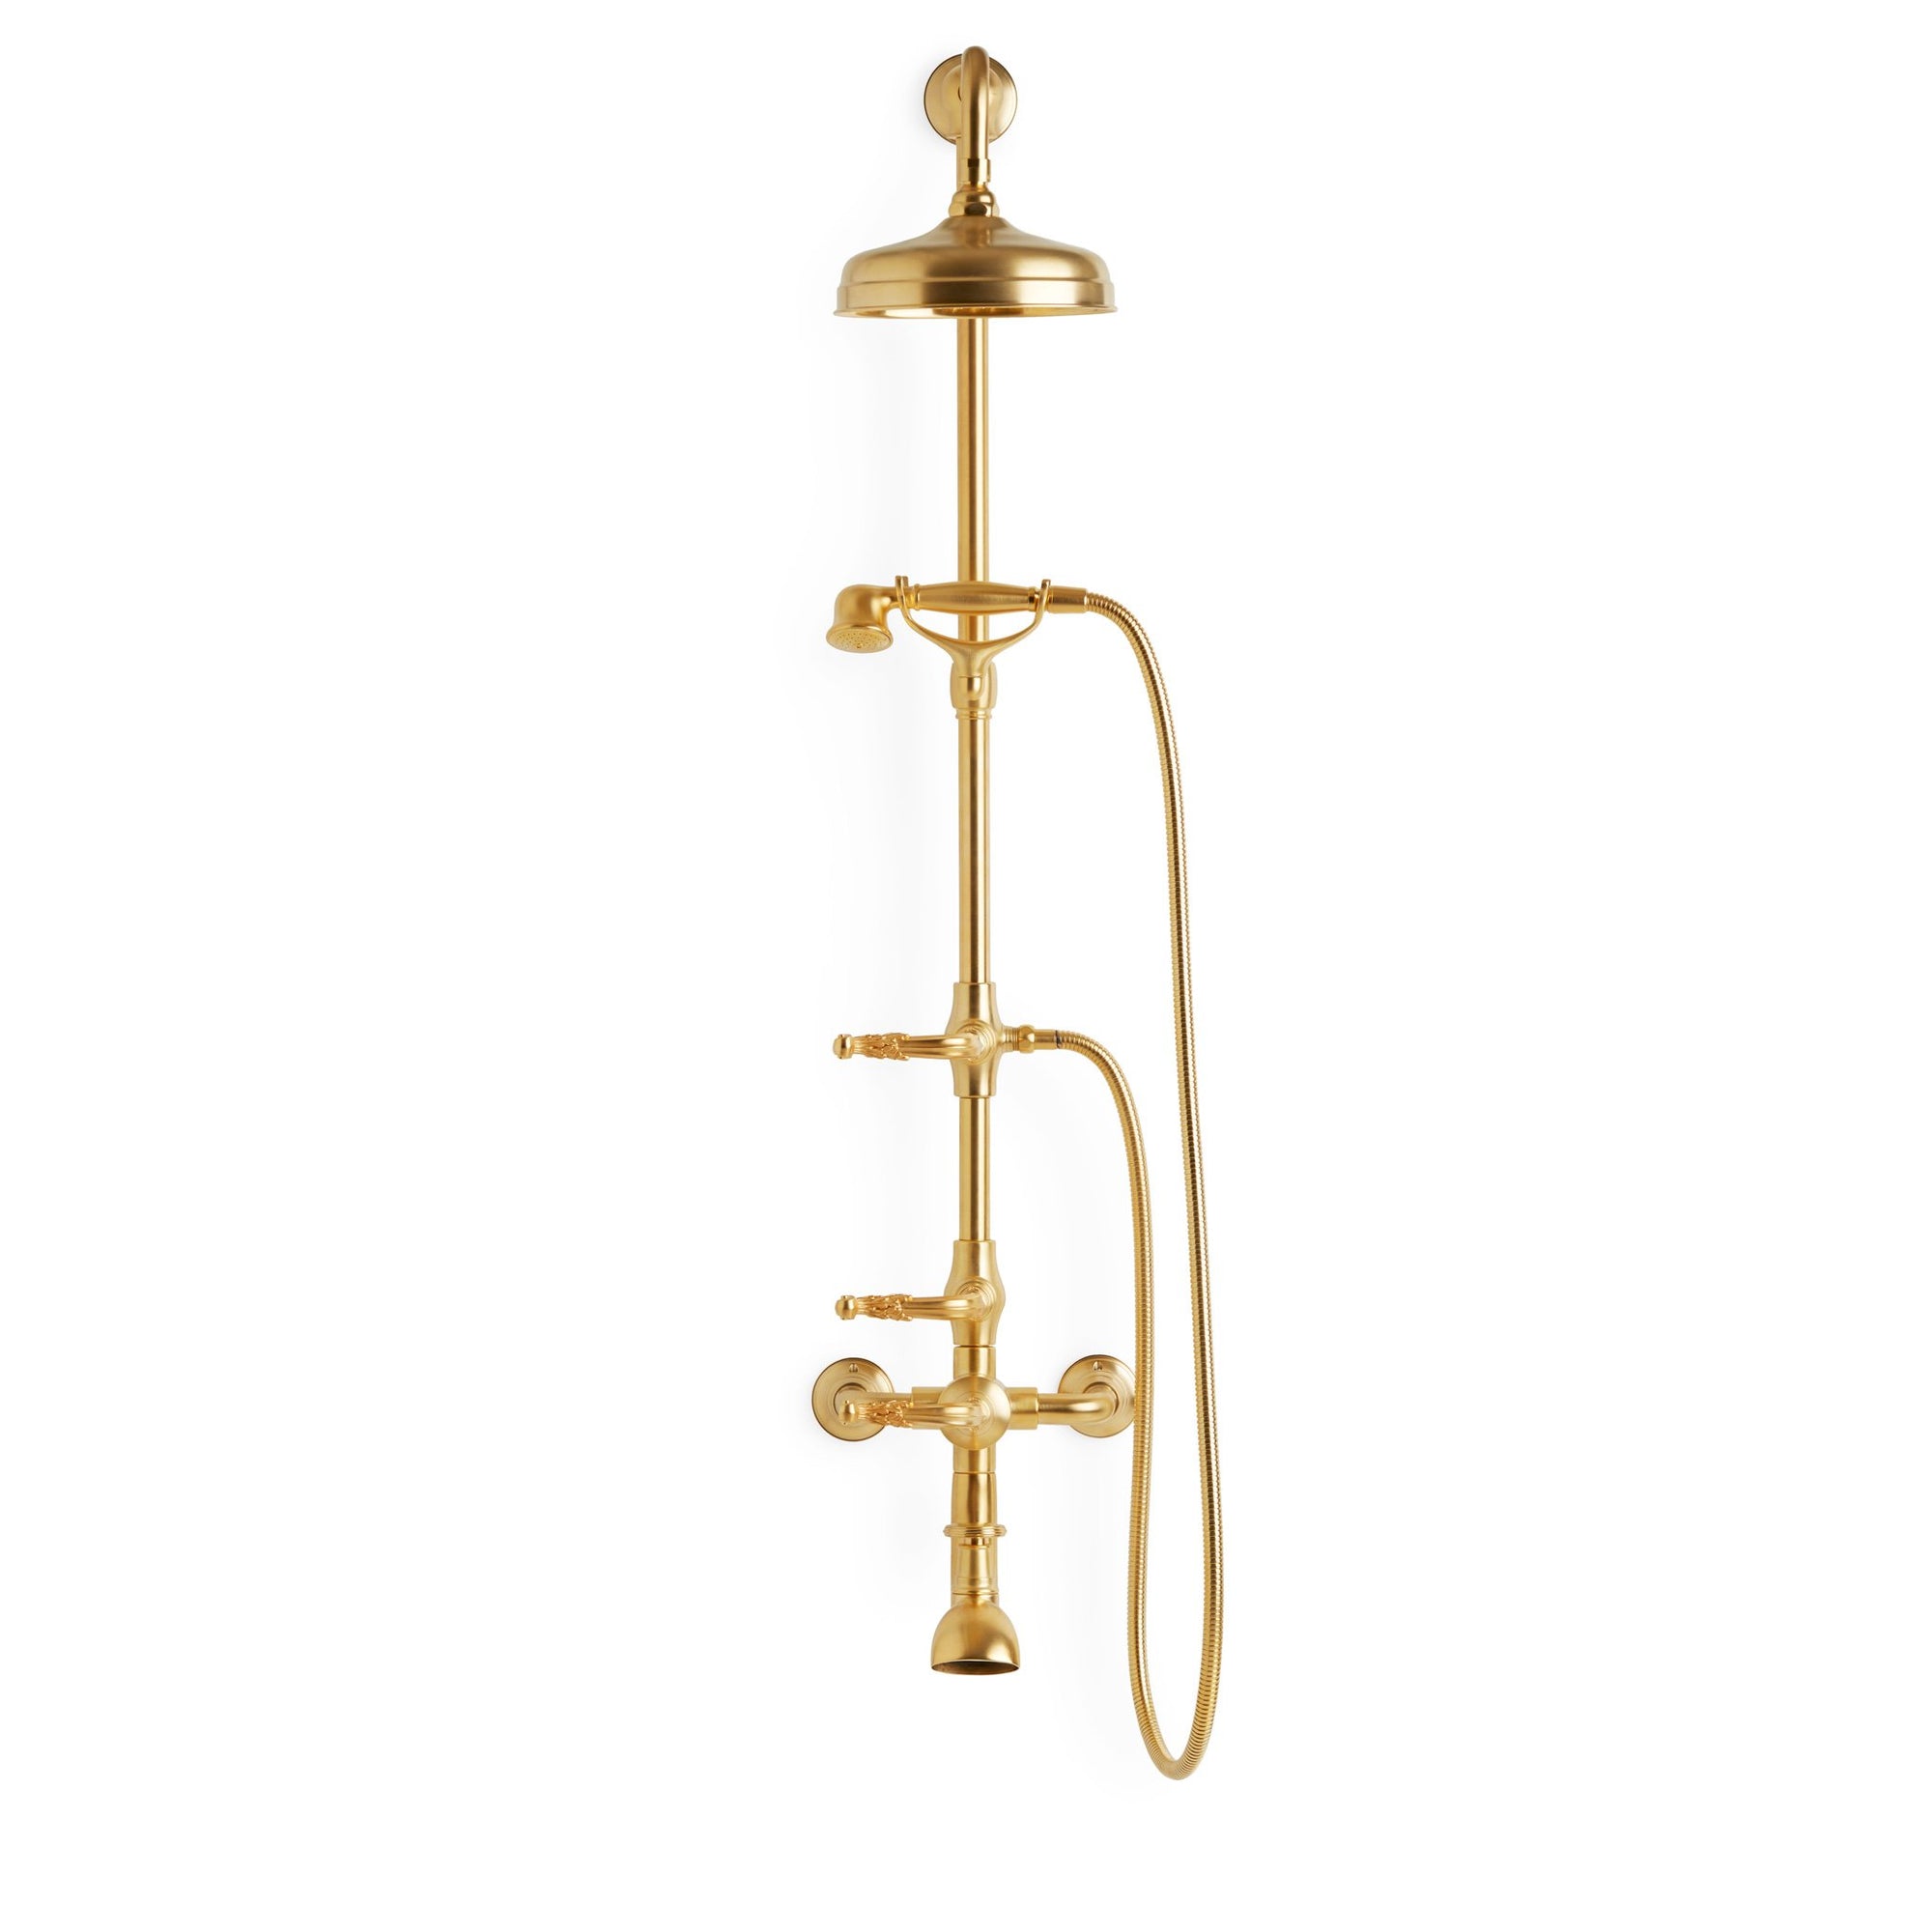 0912XSHR-GP Sherle Wagner International Ribbon & Reed Lever Exposed Shower Set in Gold Plate metal finish